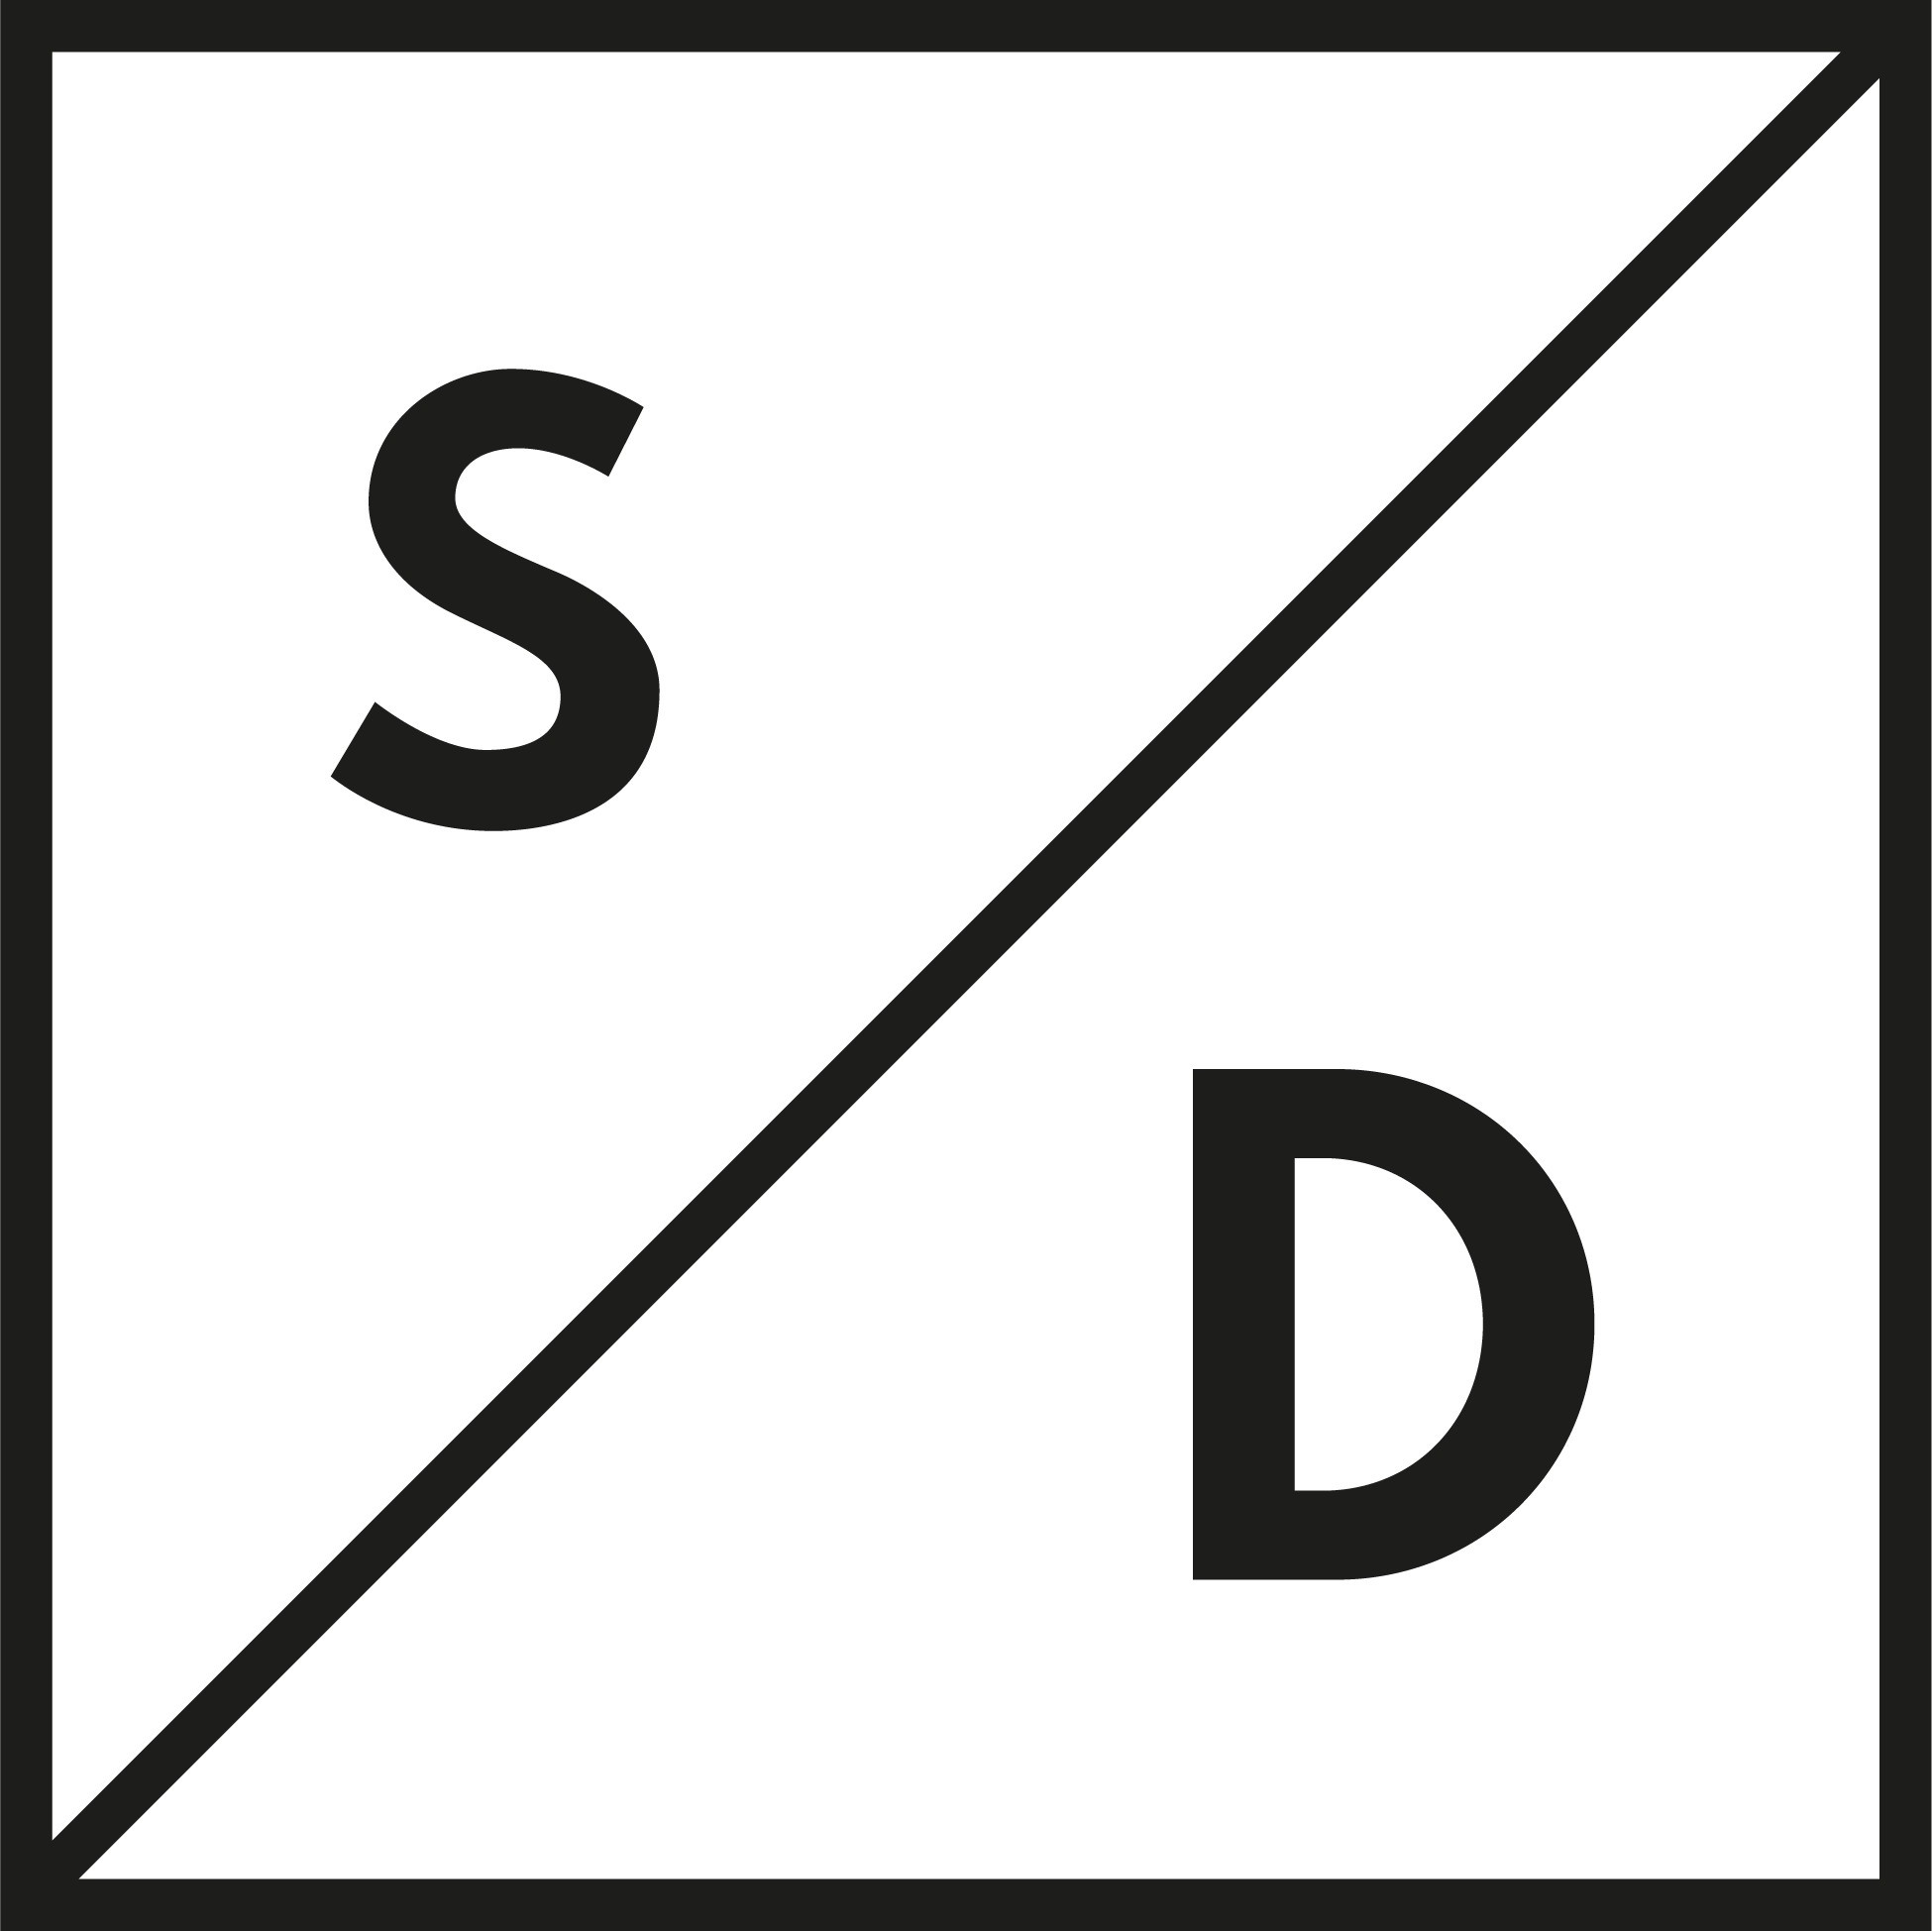 S+D_Brand Marque_Black.png